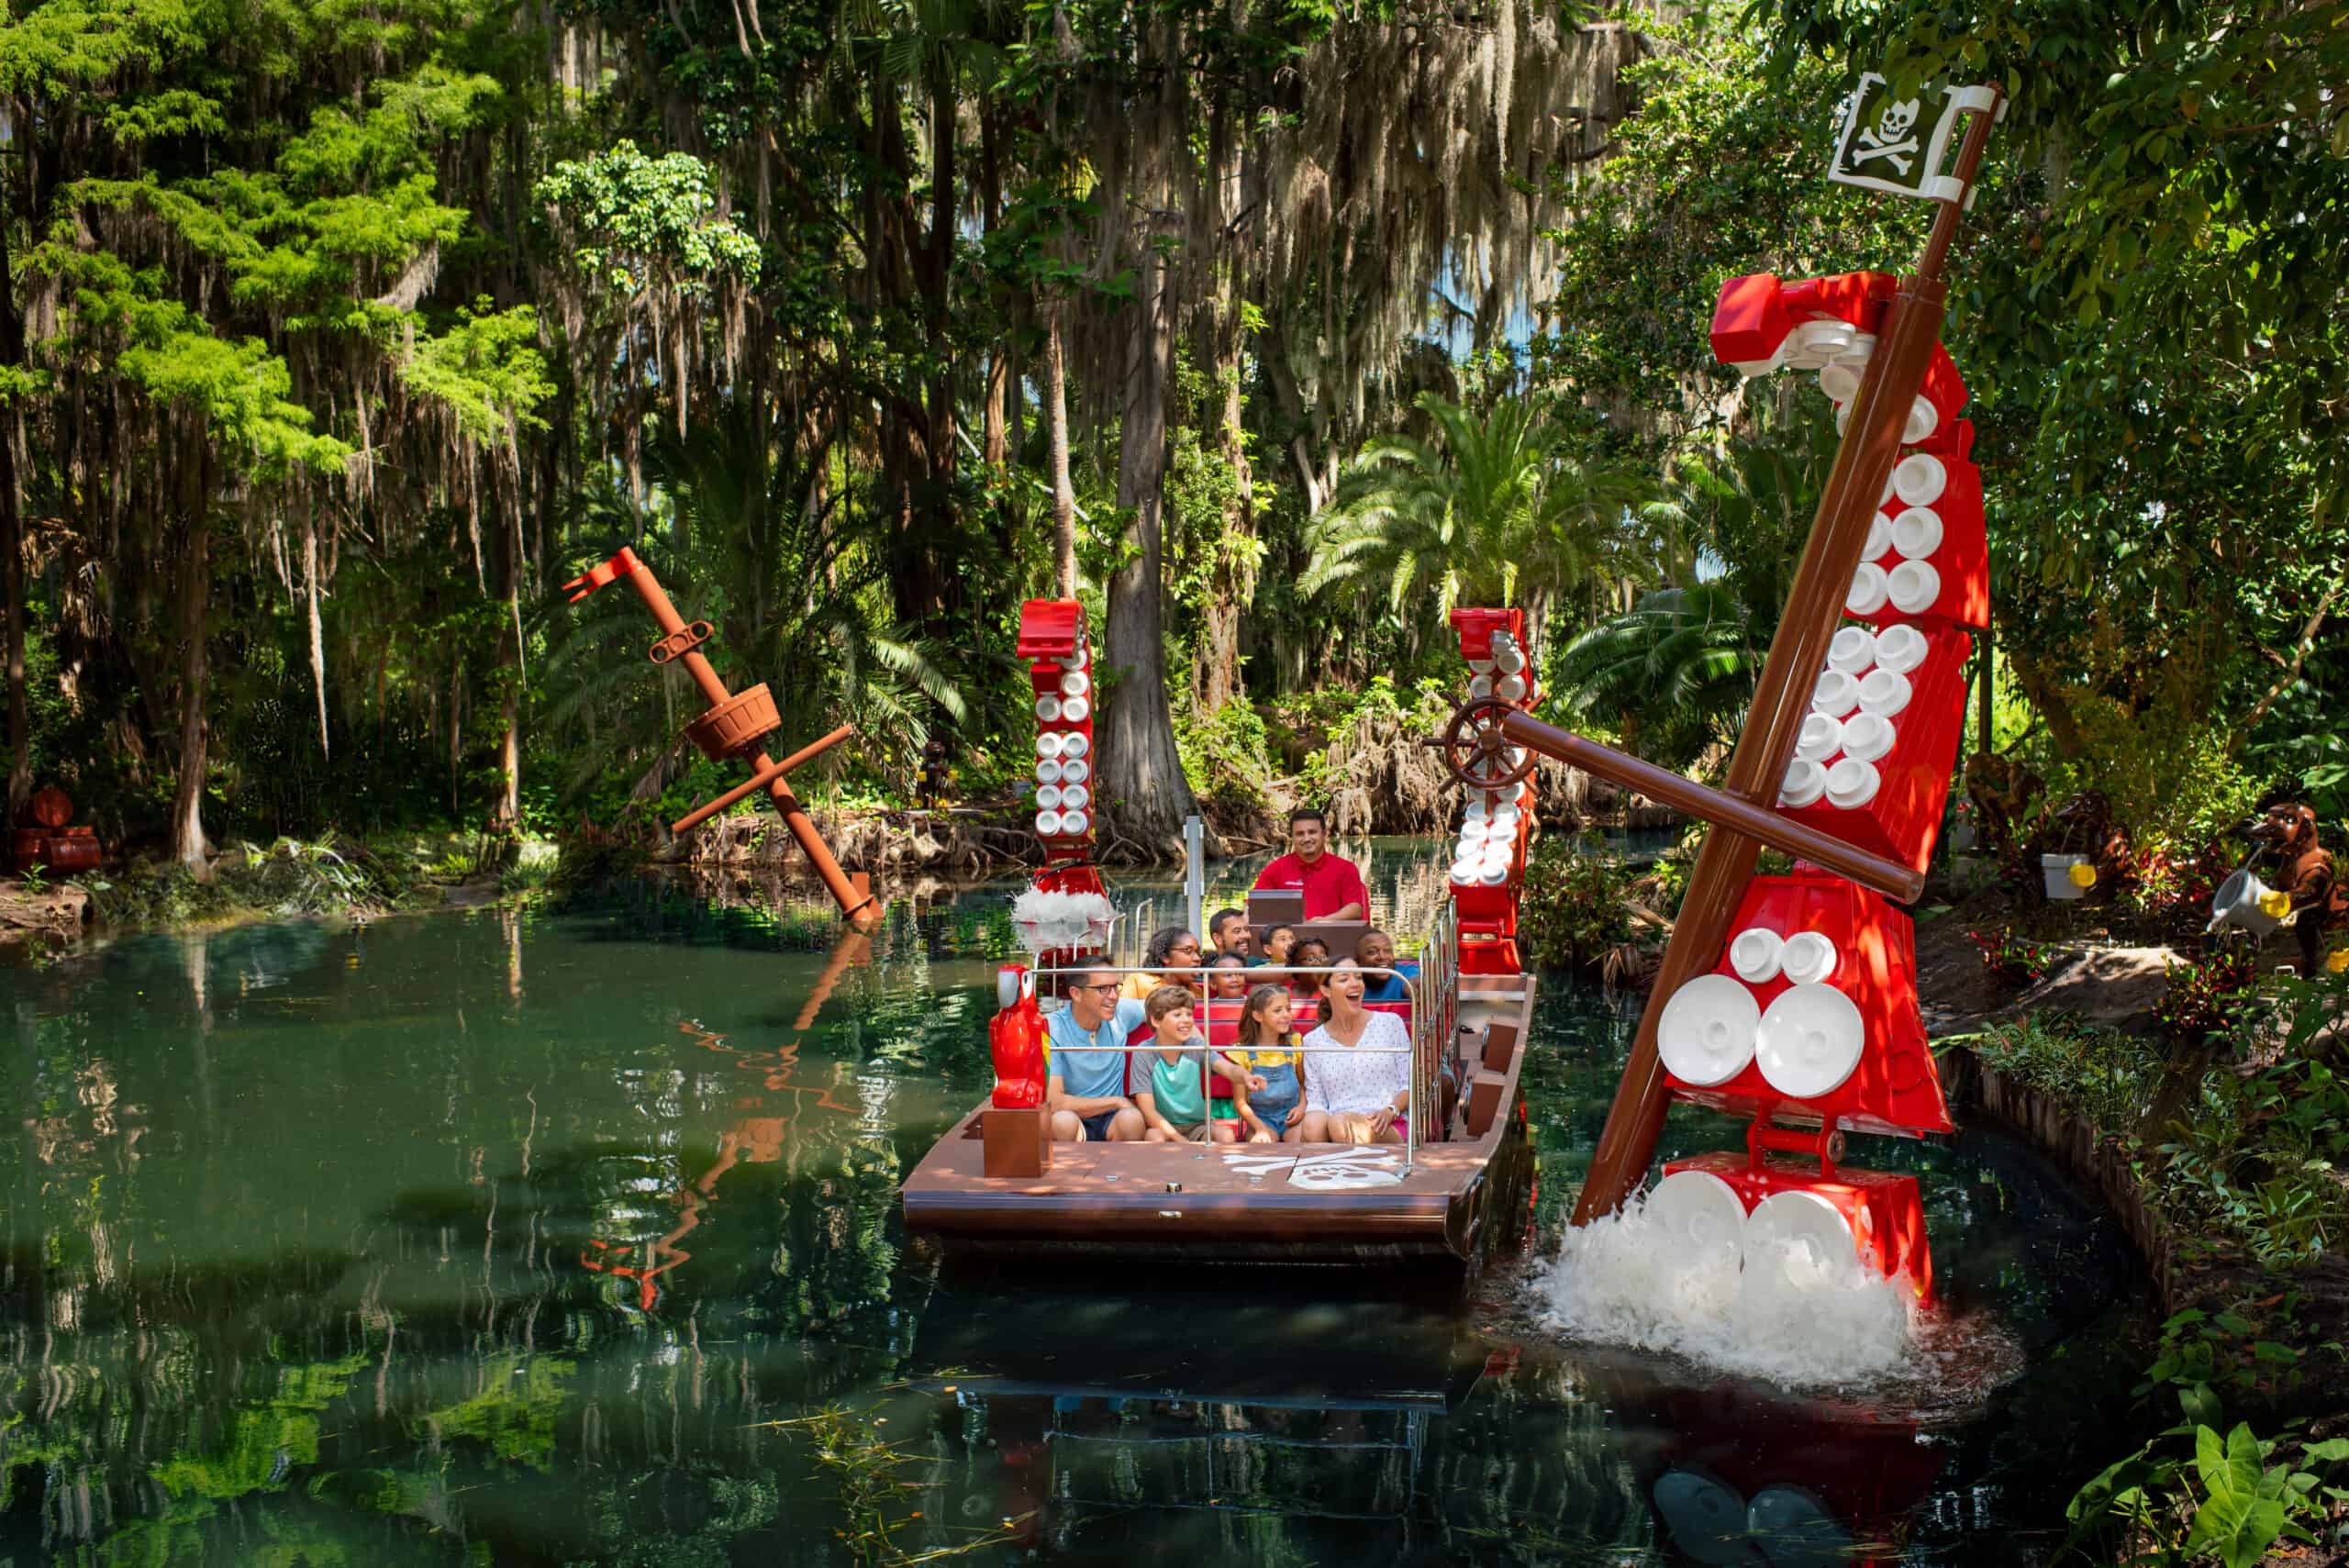 <p>Pirate River Quest is a one-of-a-kind ride in a unique location and natural setting. Guests will experience the beauty of the natural foliage and even get a potential glimpse of Florida wildlife while onboard, like our alligator spotting! As you embark on the 30-minute slow-moving boat adventure to locate Captain Redbeard and the treasure, there are fun interactive moments and a great ending!</p> <p>All boats are free-floating vessels driven by trained boat captains with extensive experience navigating narrow canals and a natural lake. Pirate River Quest is accessible to guests of all ages. There are ten total boats including two ADA-accessible boats that allow guests in wheelchairs to ride securely.</p> <p>While Legoland Florida is known for its short wait times, this new ride will have the longest line in the park due to its popularity. The best time of day to catch a short queue is during the neighboring Watersports Stunt Show.</p>